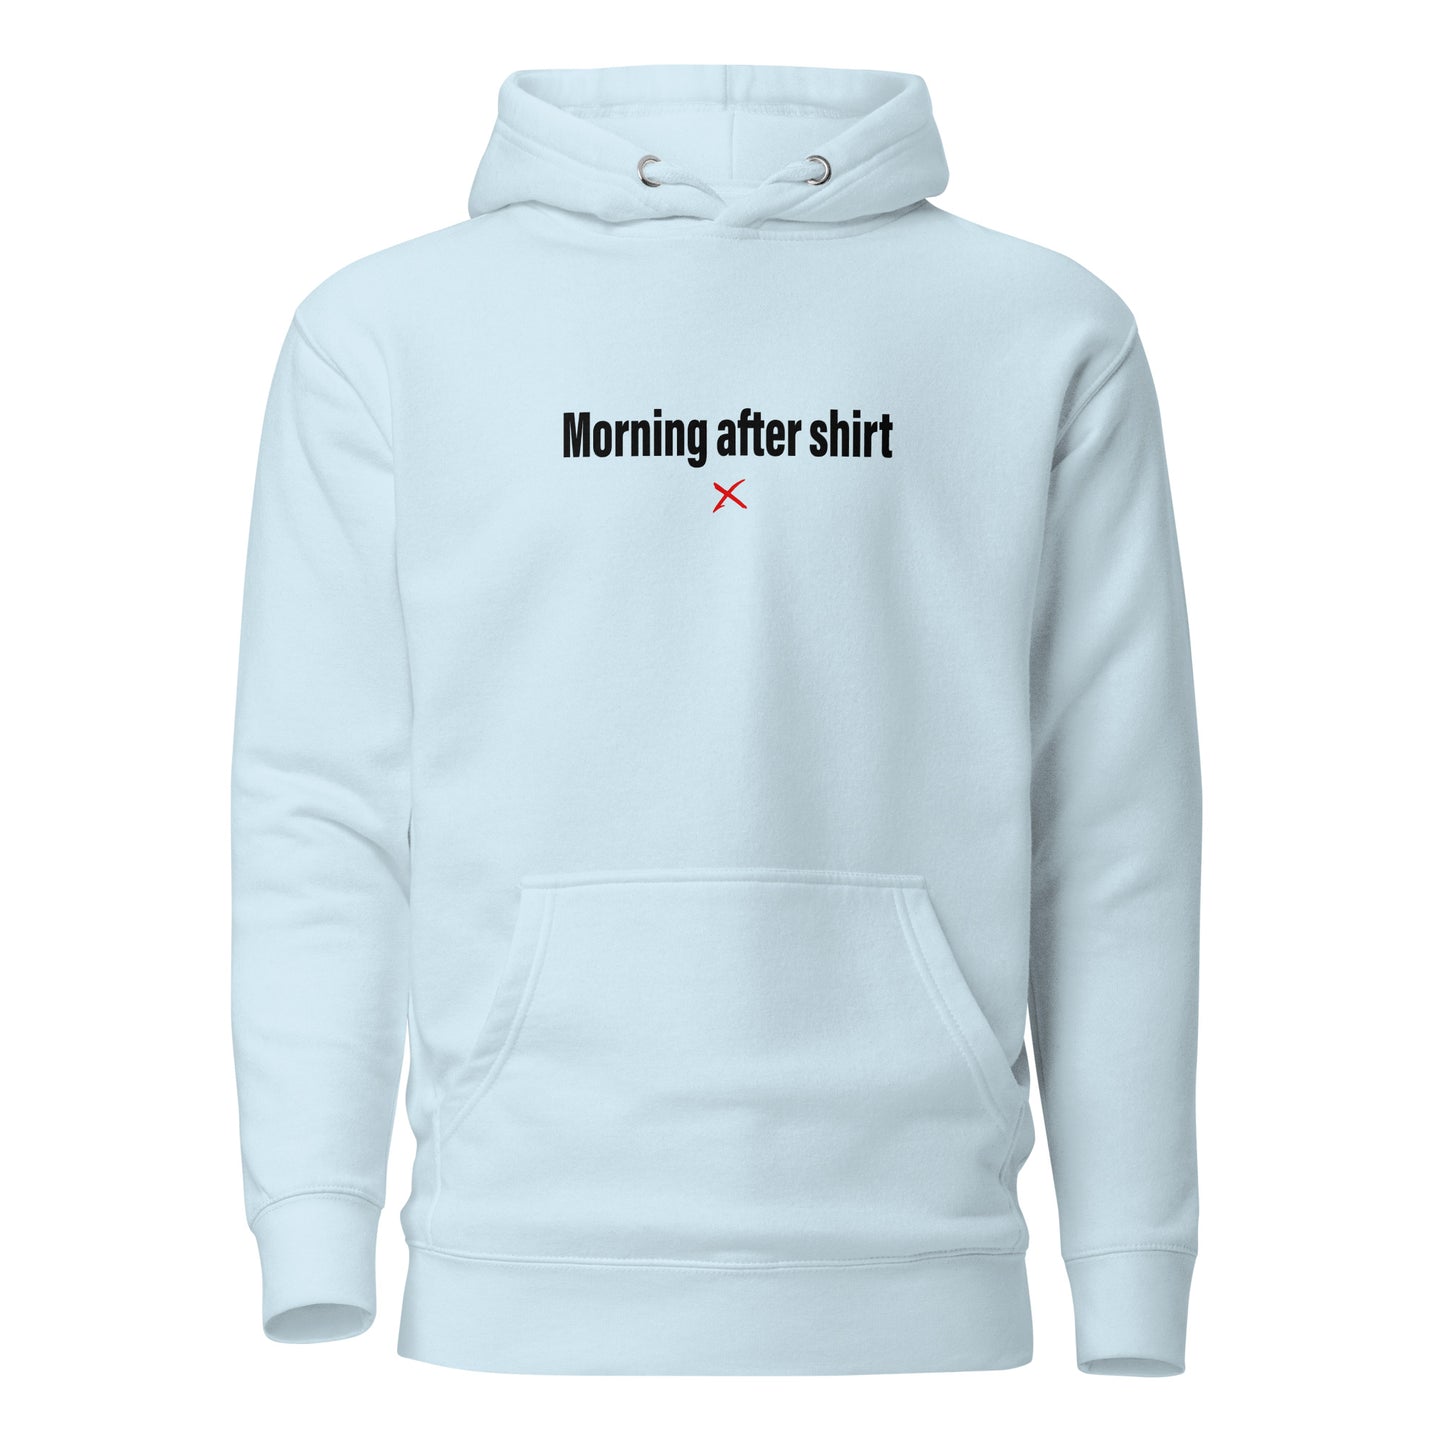 Morning after shirt - Hoodie